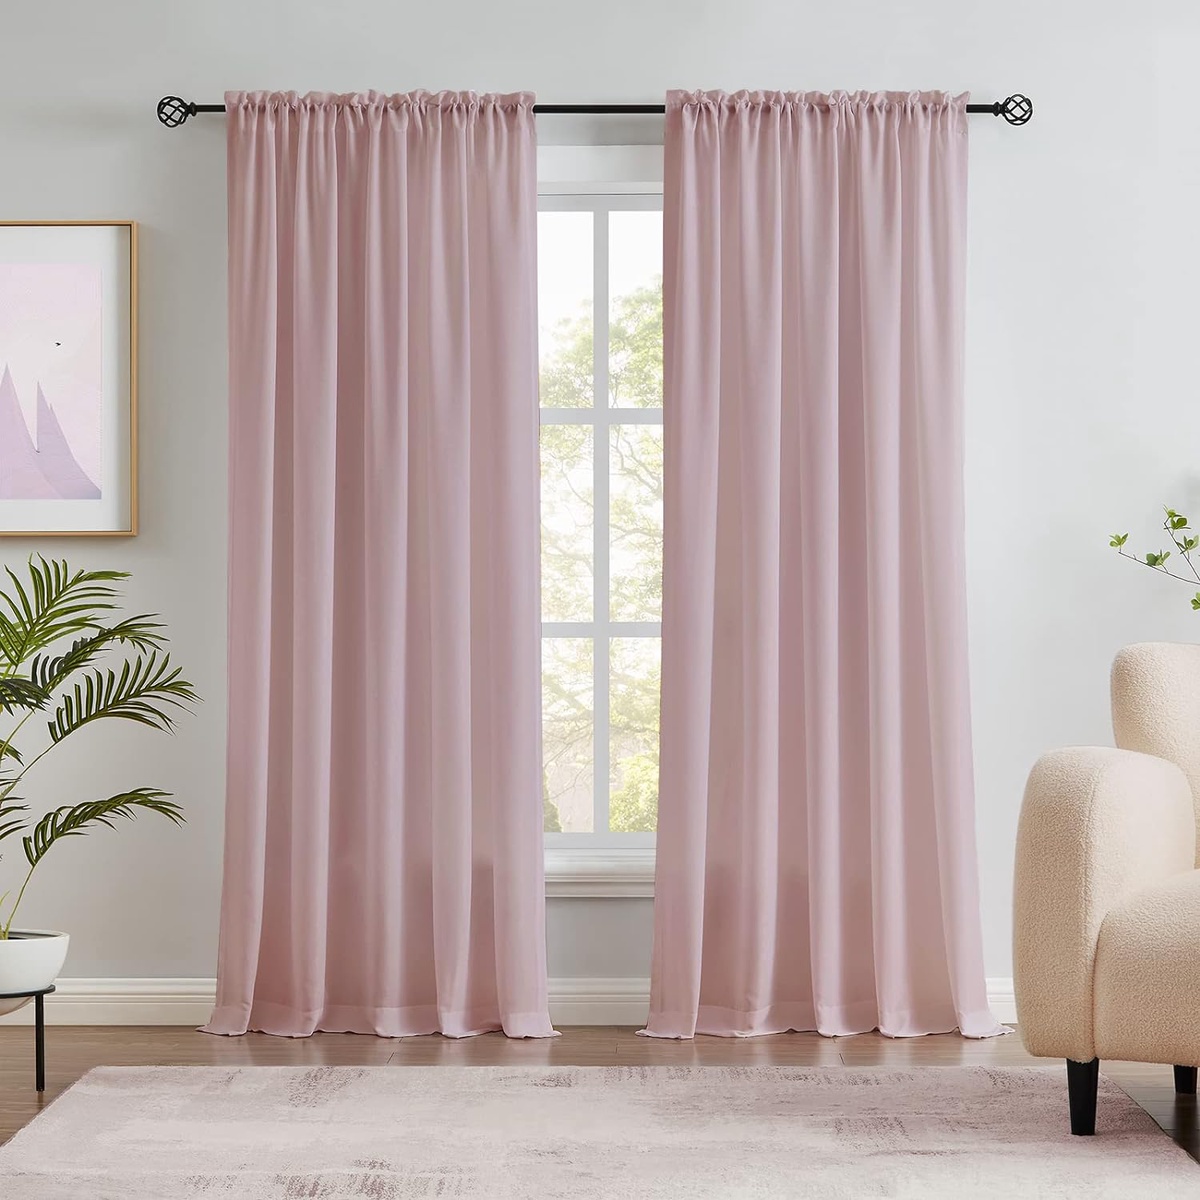 Are You In Search Of The Perfect Sheer Curtains By Curtains Dubai?